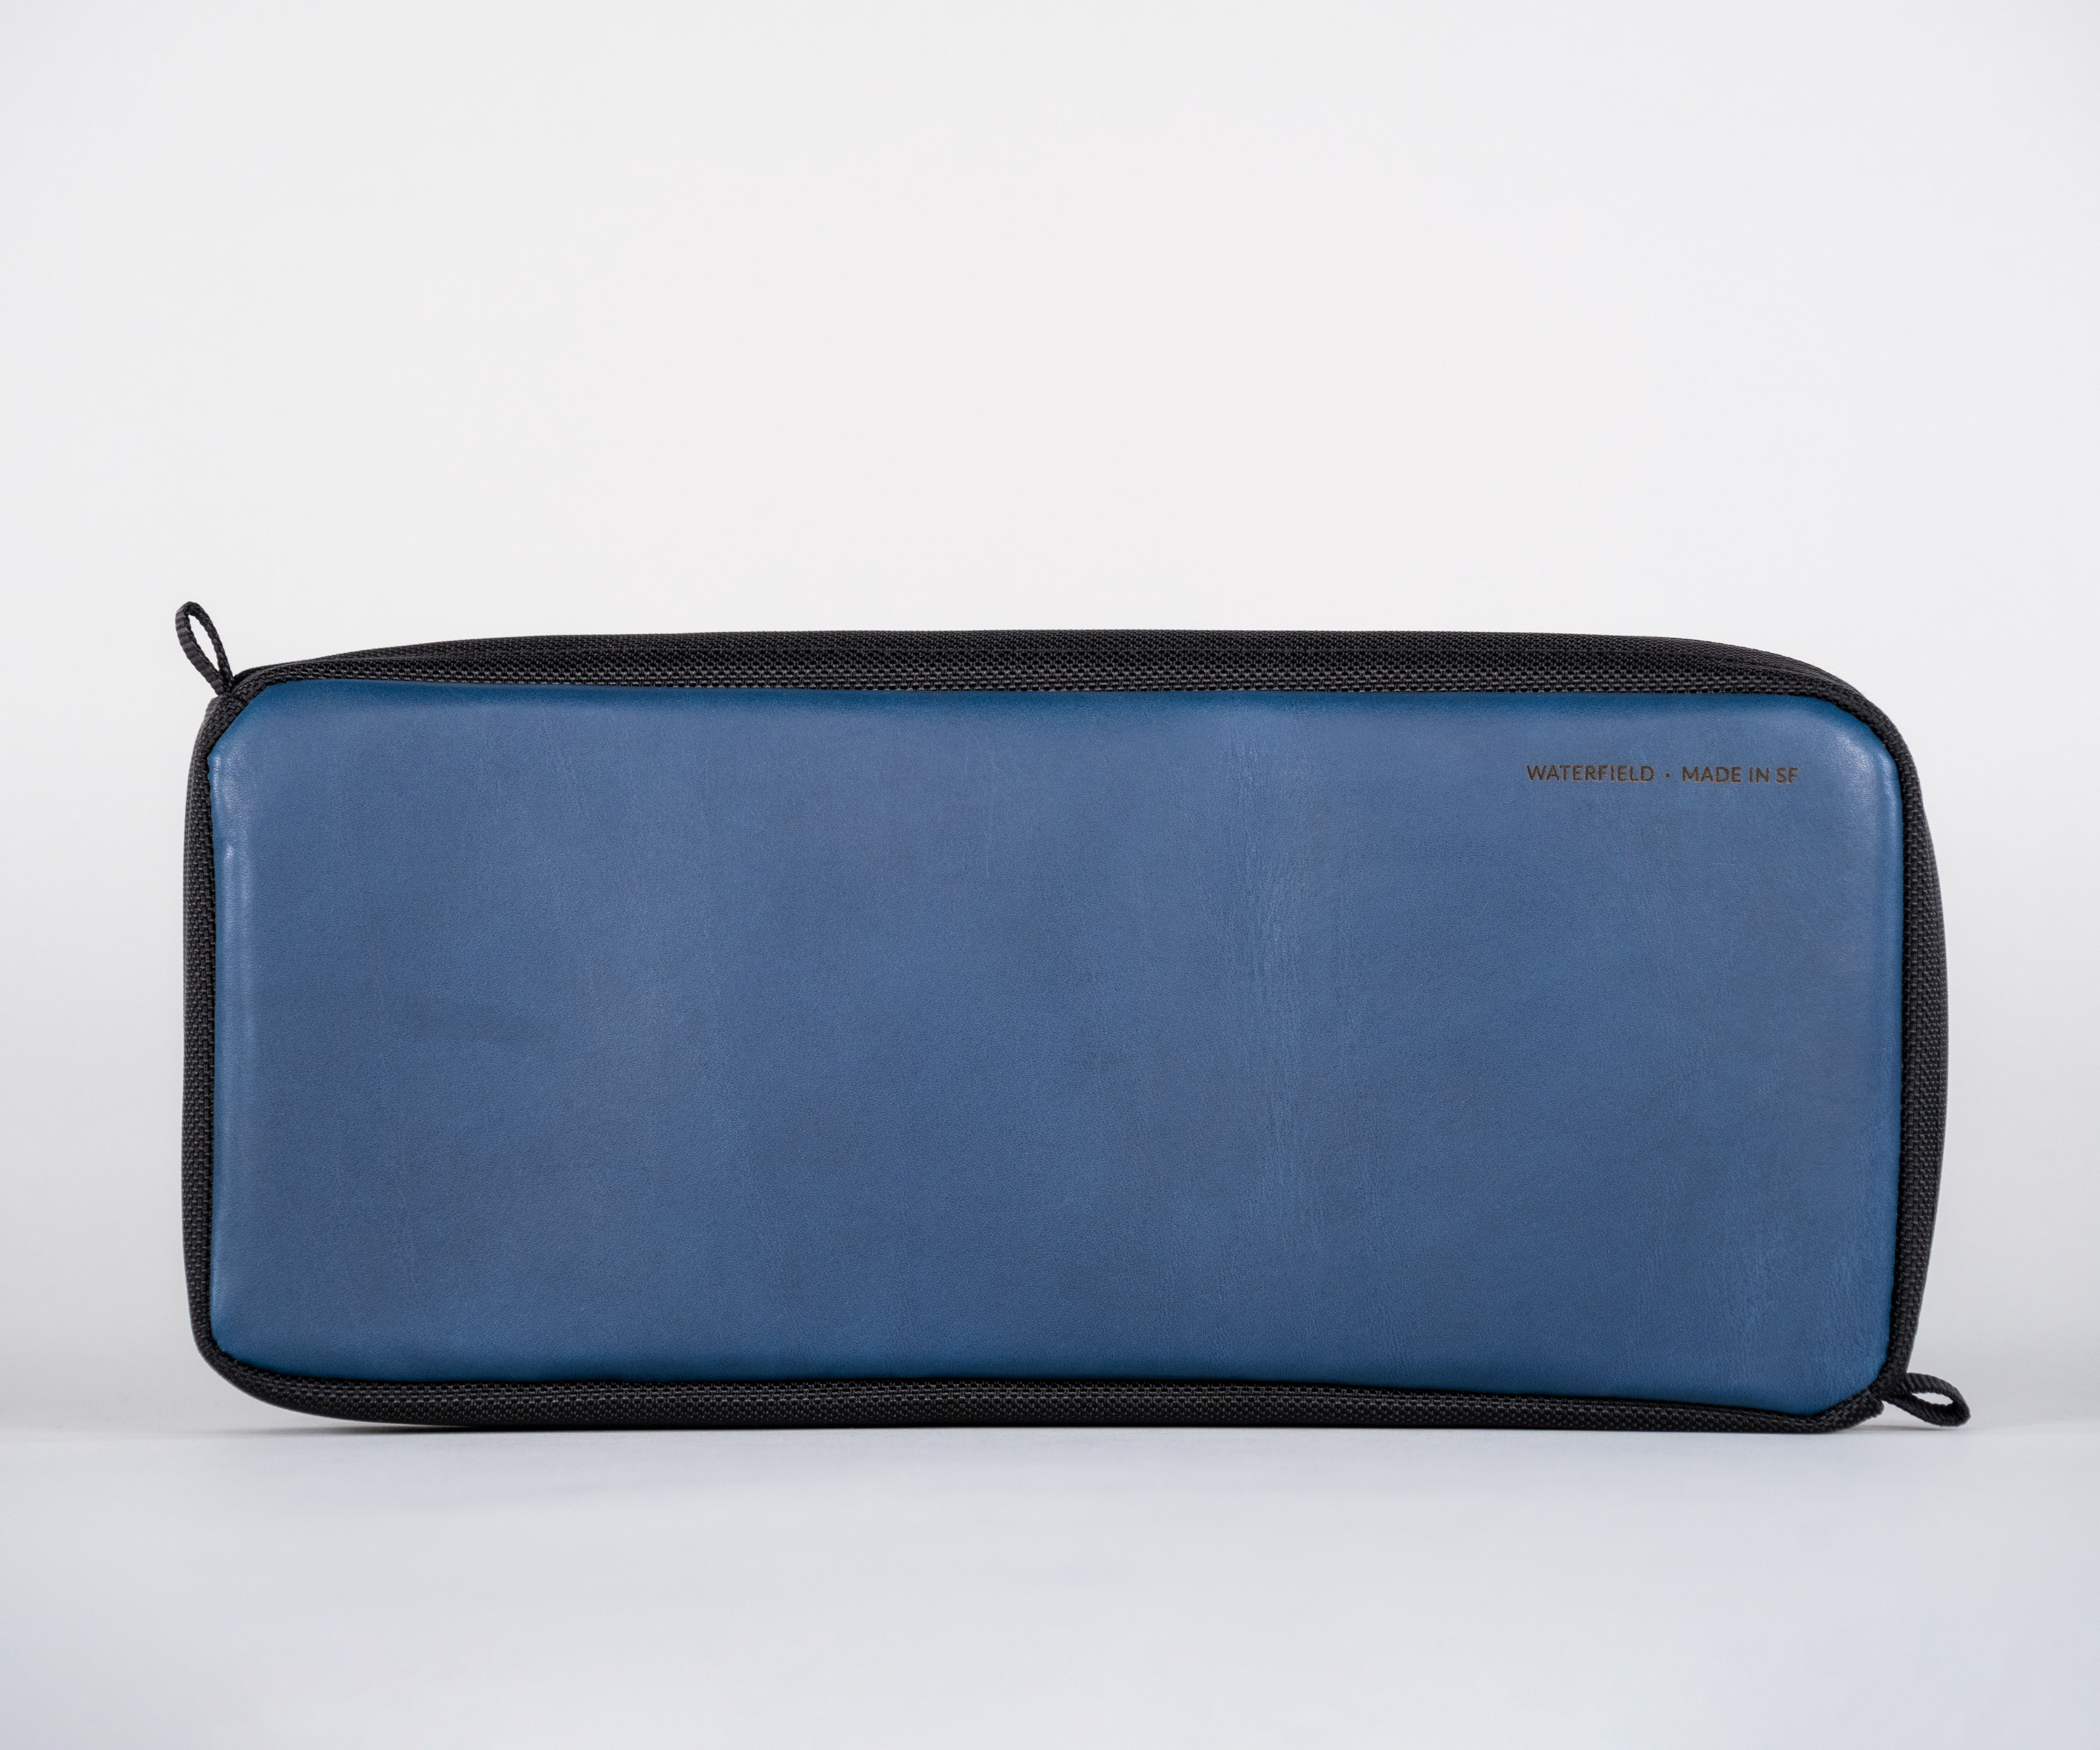 ROG Ally Magentic Case in blue full-grain leather